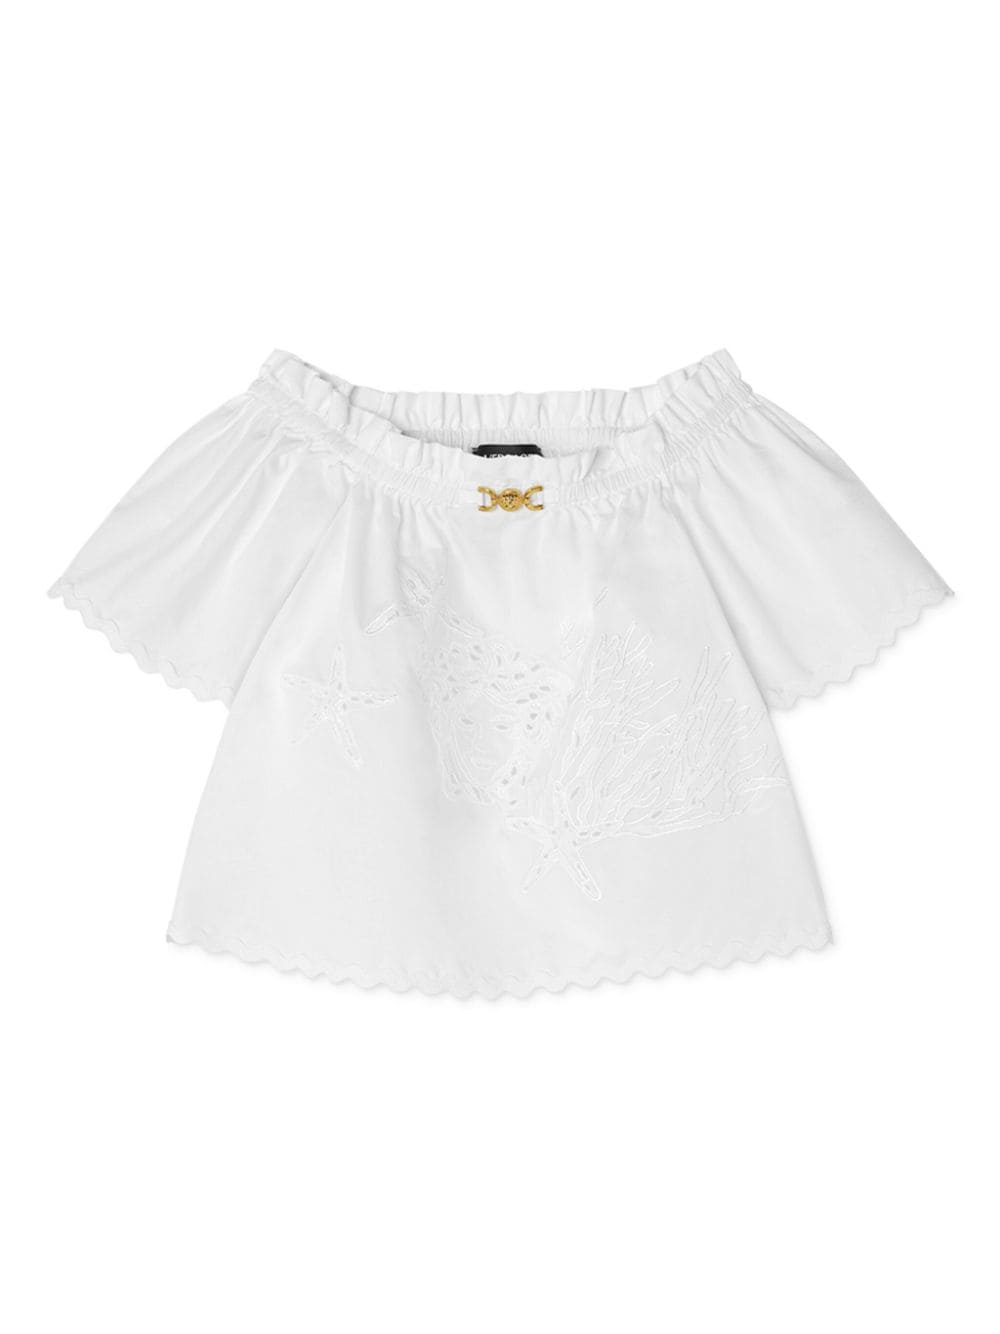 Versace Kids' Sangallo Embroidered Shirt In White